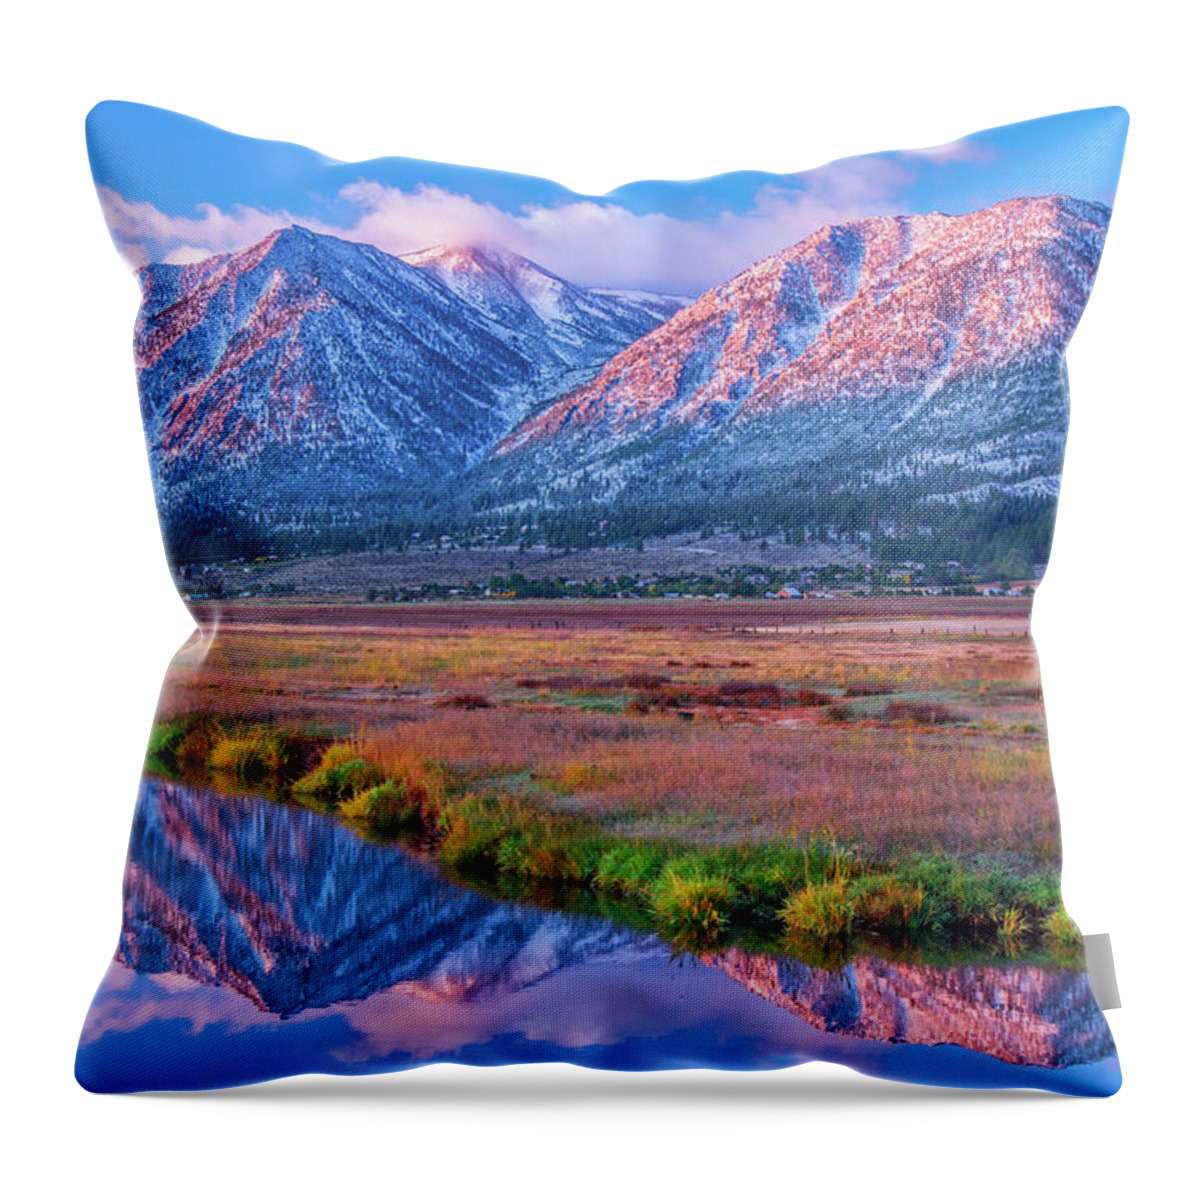 Landscape Throw Pillow featuring the photograph Job's Peak Reflection by Marc Crumpler